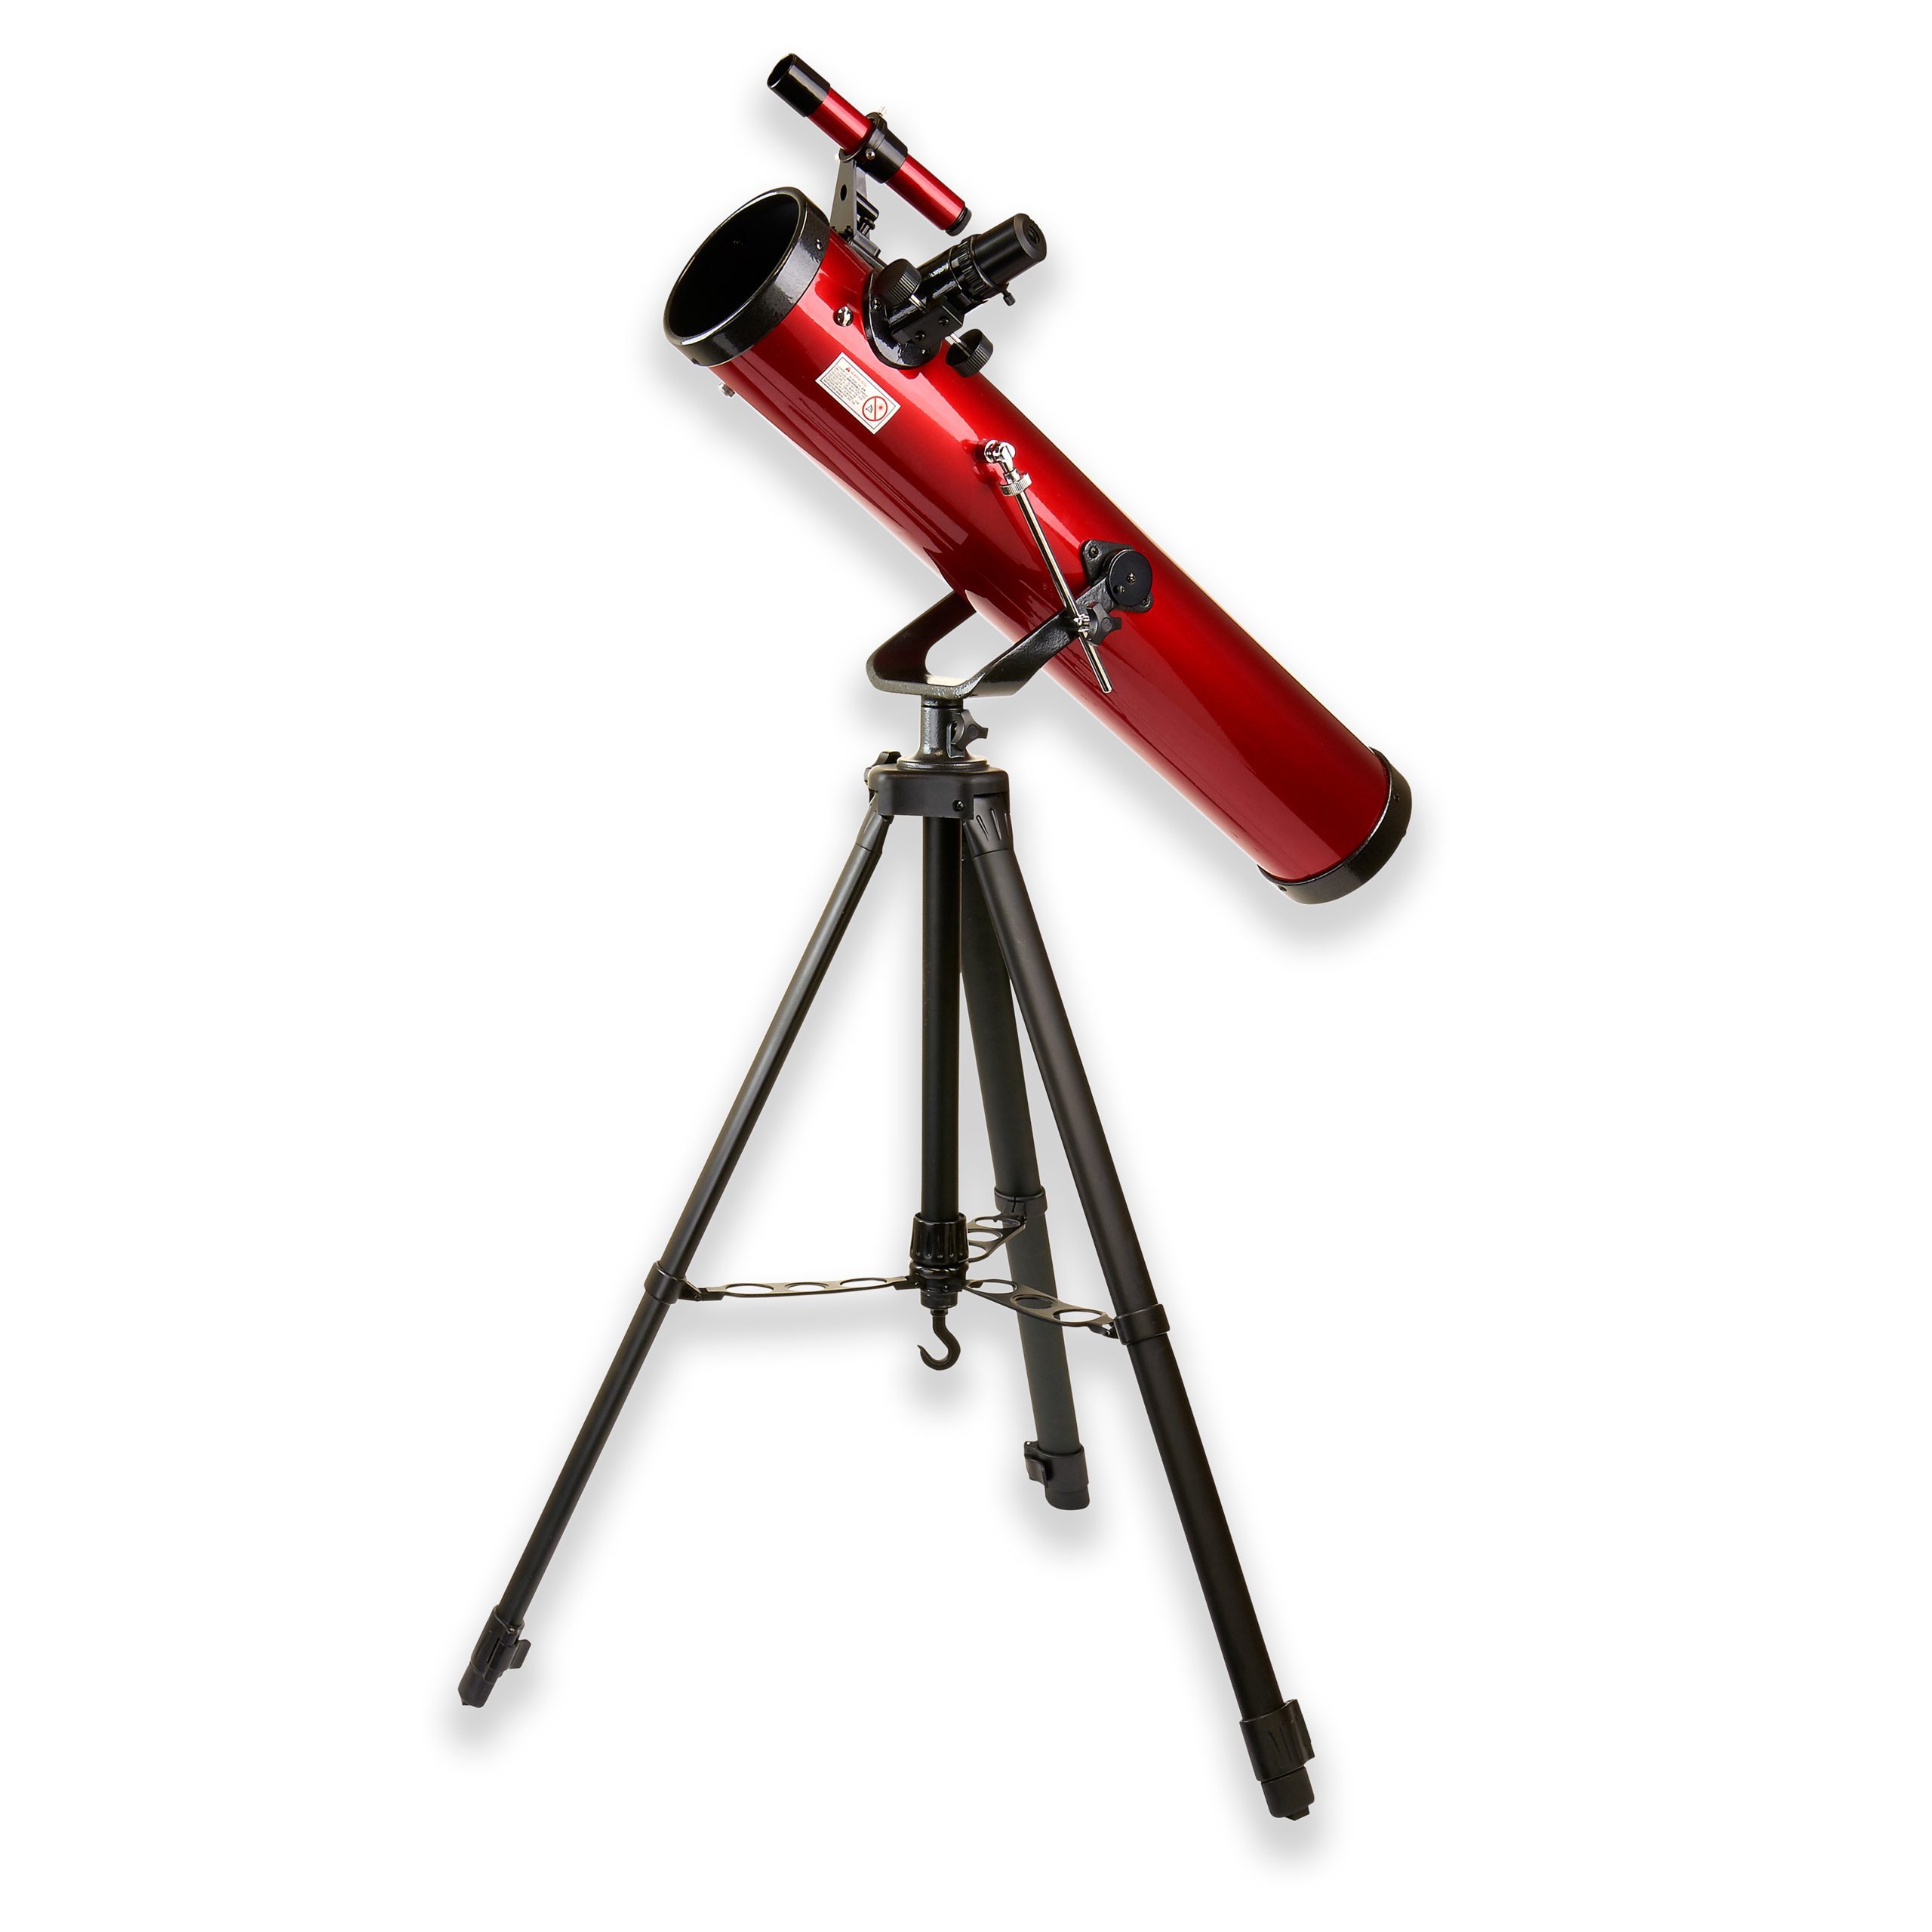 Carson Red Planet 45-100x114mm Newtonian Reflector Telescope RP-300 